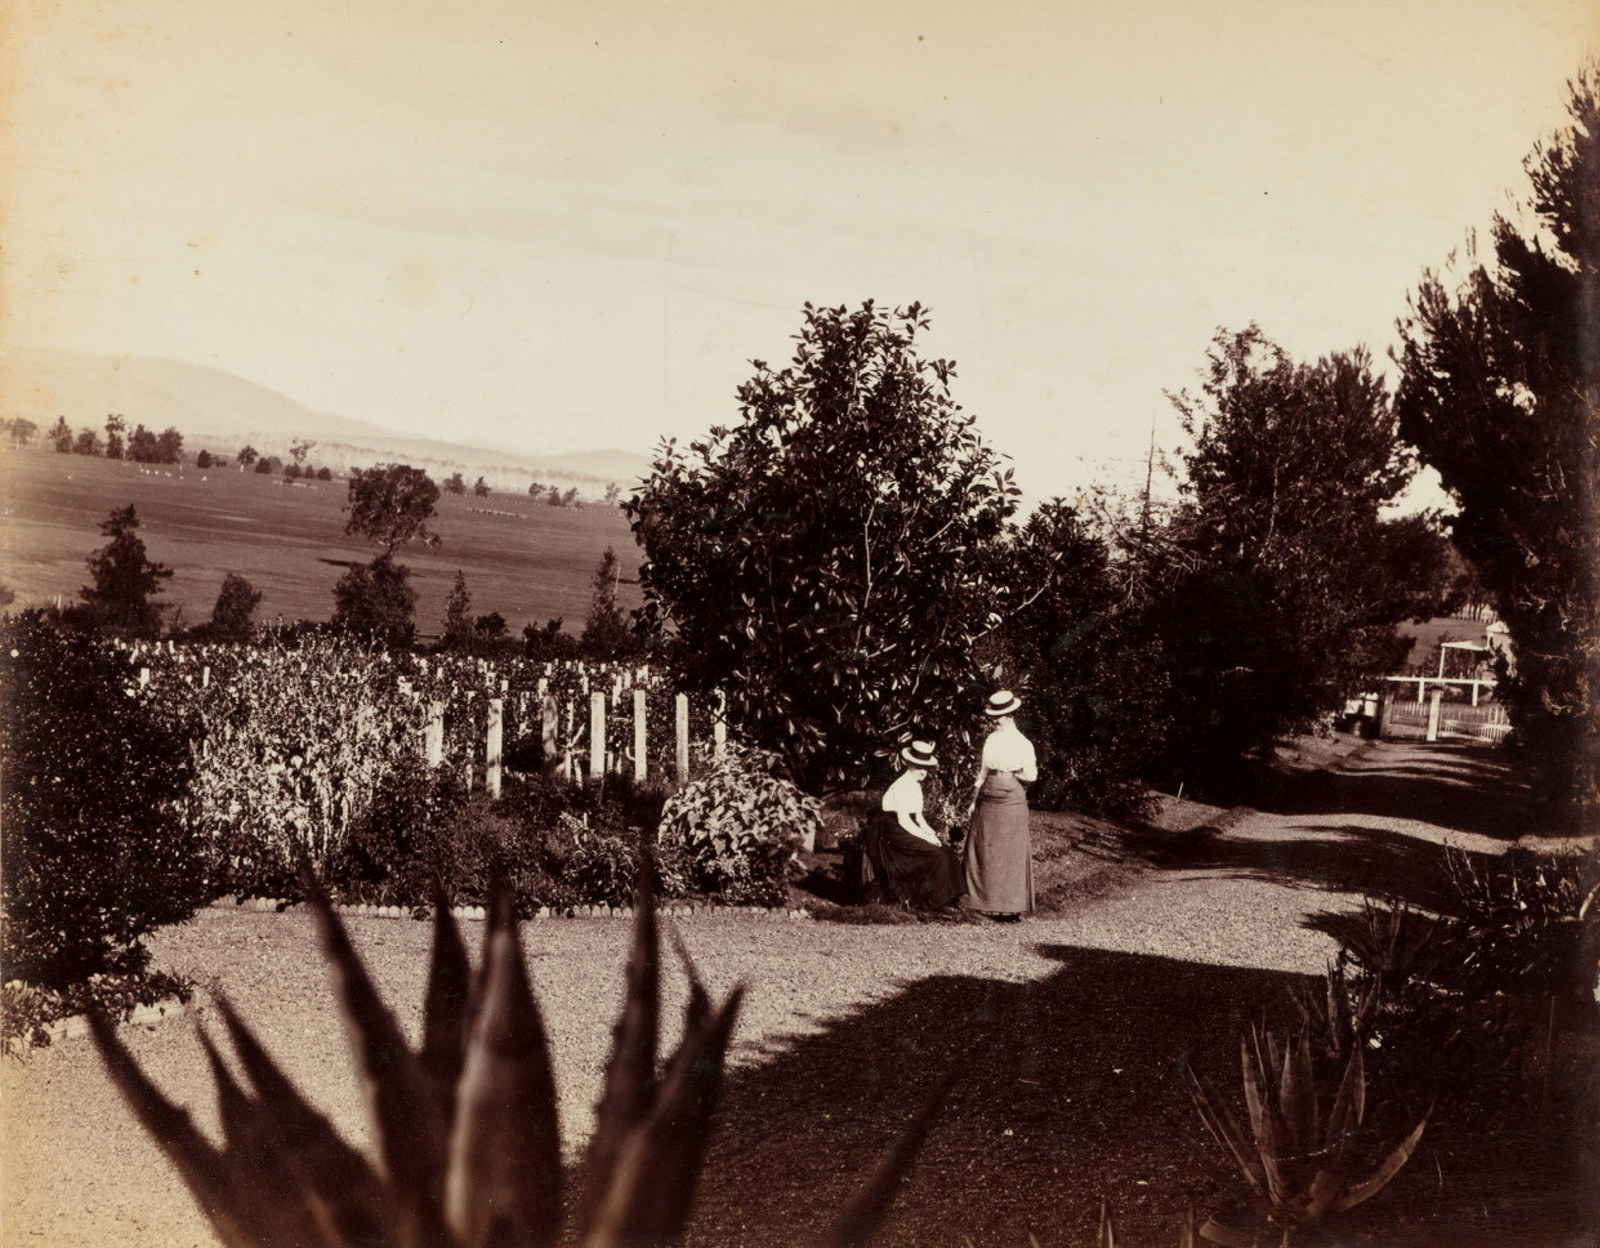 Fifth panel of a five part photographic panorama of Turanville near Scone / photographed by Joseph Check, 1889